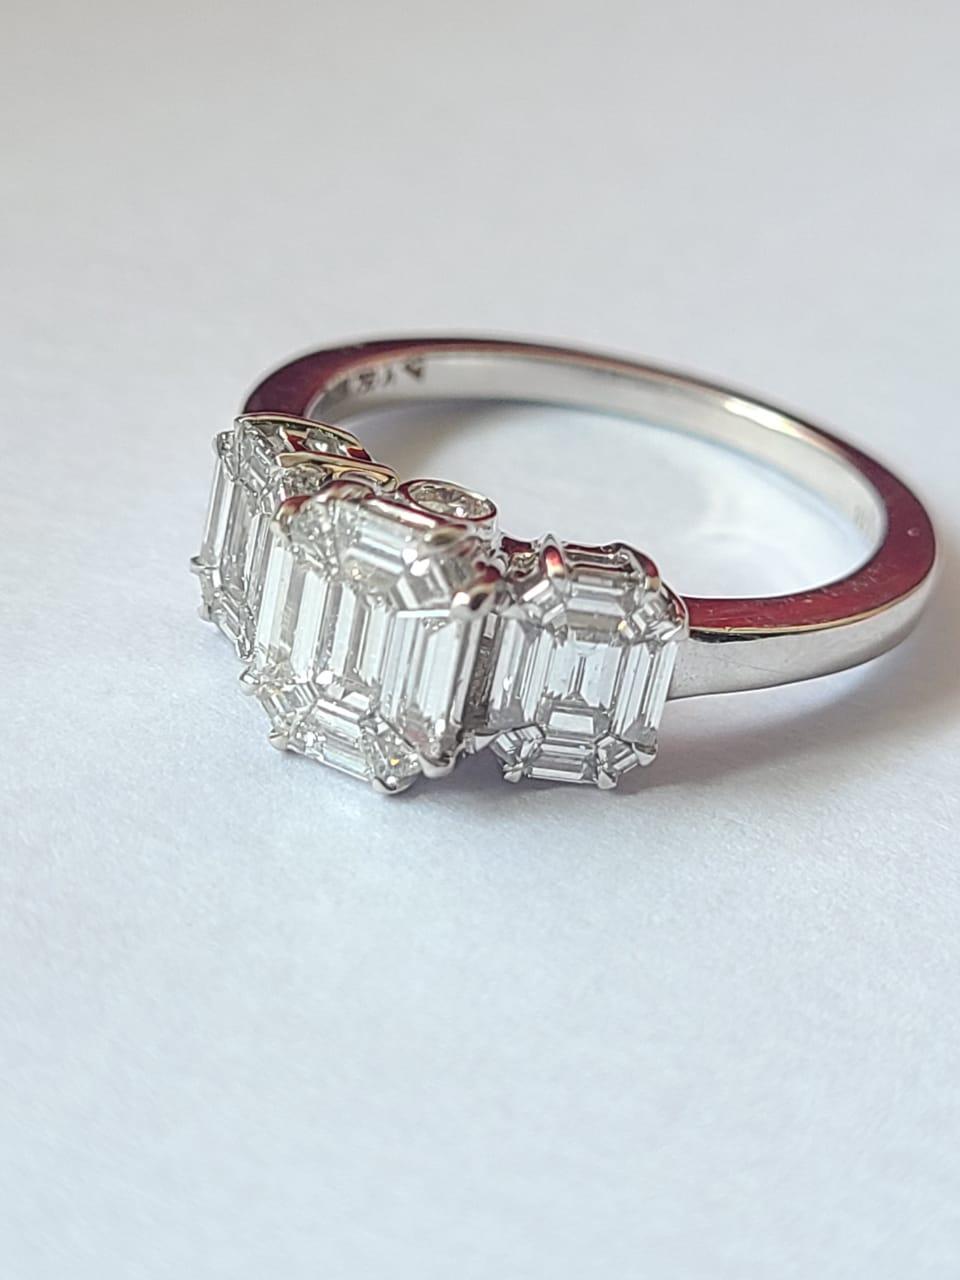 Natural Emerald Cut Diamonds Engagement / Wedding Ring Set in 18K White Gold For Sale 1